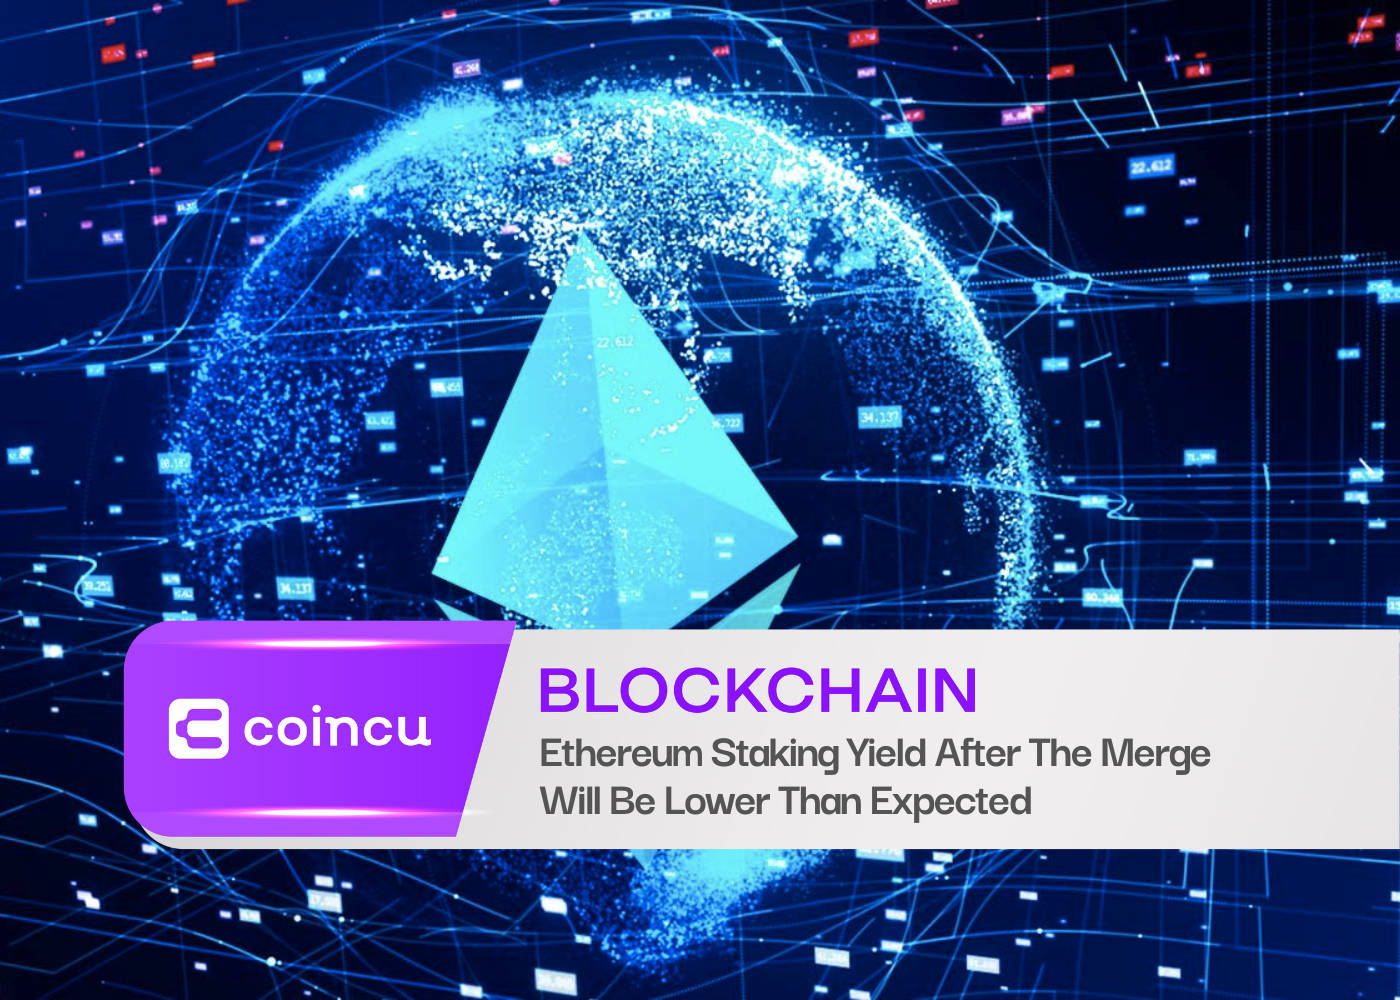 Ethereum Staking Yield After The Merge Will Be Lower Than Expected